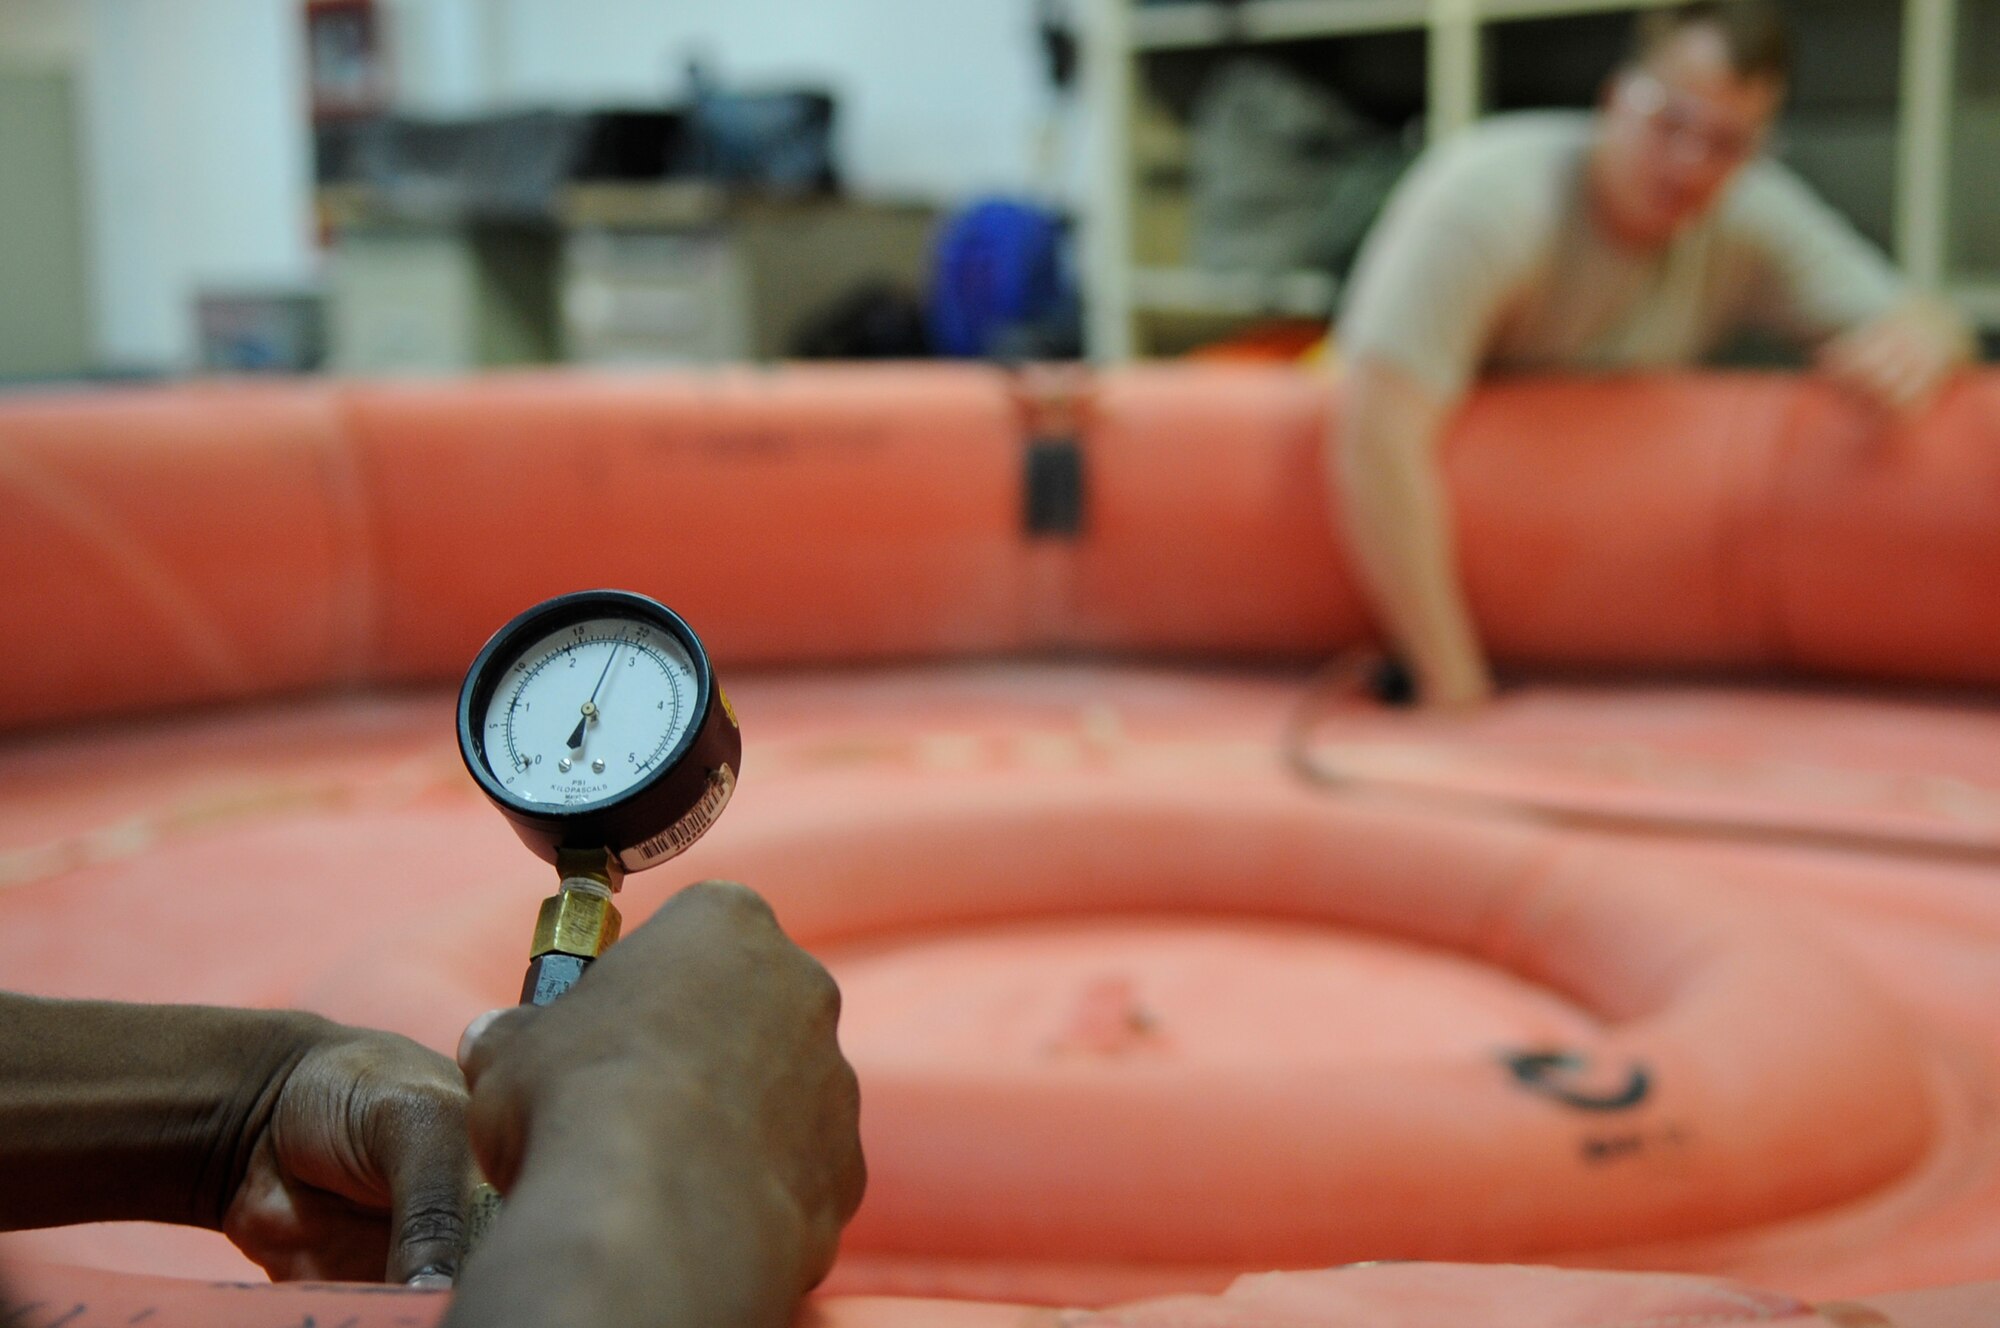 U.S. Air Force Senior Airman Isaiah Sigler, 18th Operations Support Squadron aircrew flight equipment specialist, checks the pressure of a twenty-man raft as Senior Airman Zachary Gribble, 18th OSS aircrew flight equipment specialist, inflates it to test for leaks and serviceability on Kadena Air Base, Japan May 21, 2014. The 18th OSS aircrew flight equipment maintains parachutes, life preservers, survival kits and life-sustaining equipment for more than 80 aircraft. (U.S. Air Force photo by Senior Airman Marcus Morris)